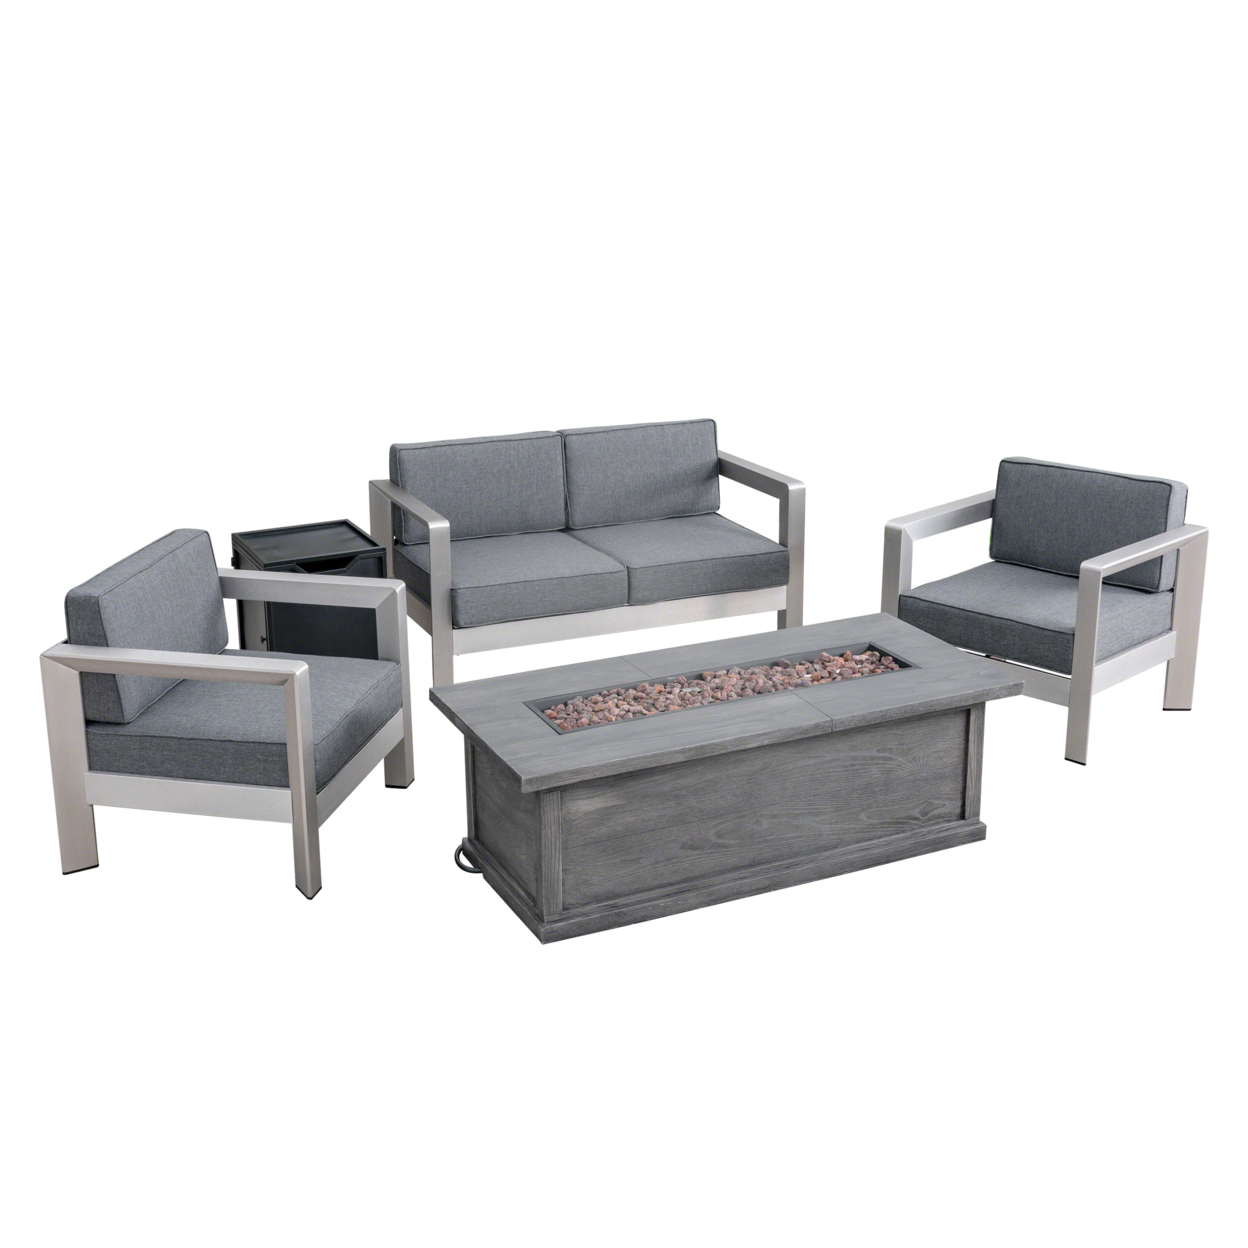 Mike Outdoor 4-Seater Aluminum Chat Set With Fire Pit And Tank Holder - Silver + Gray + Brown + Black